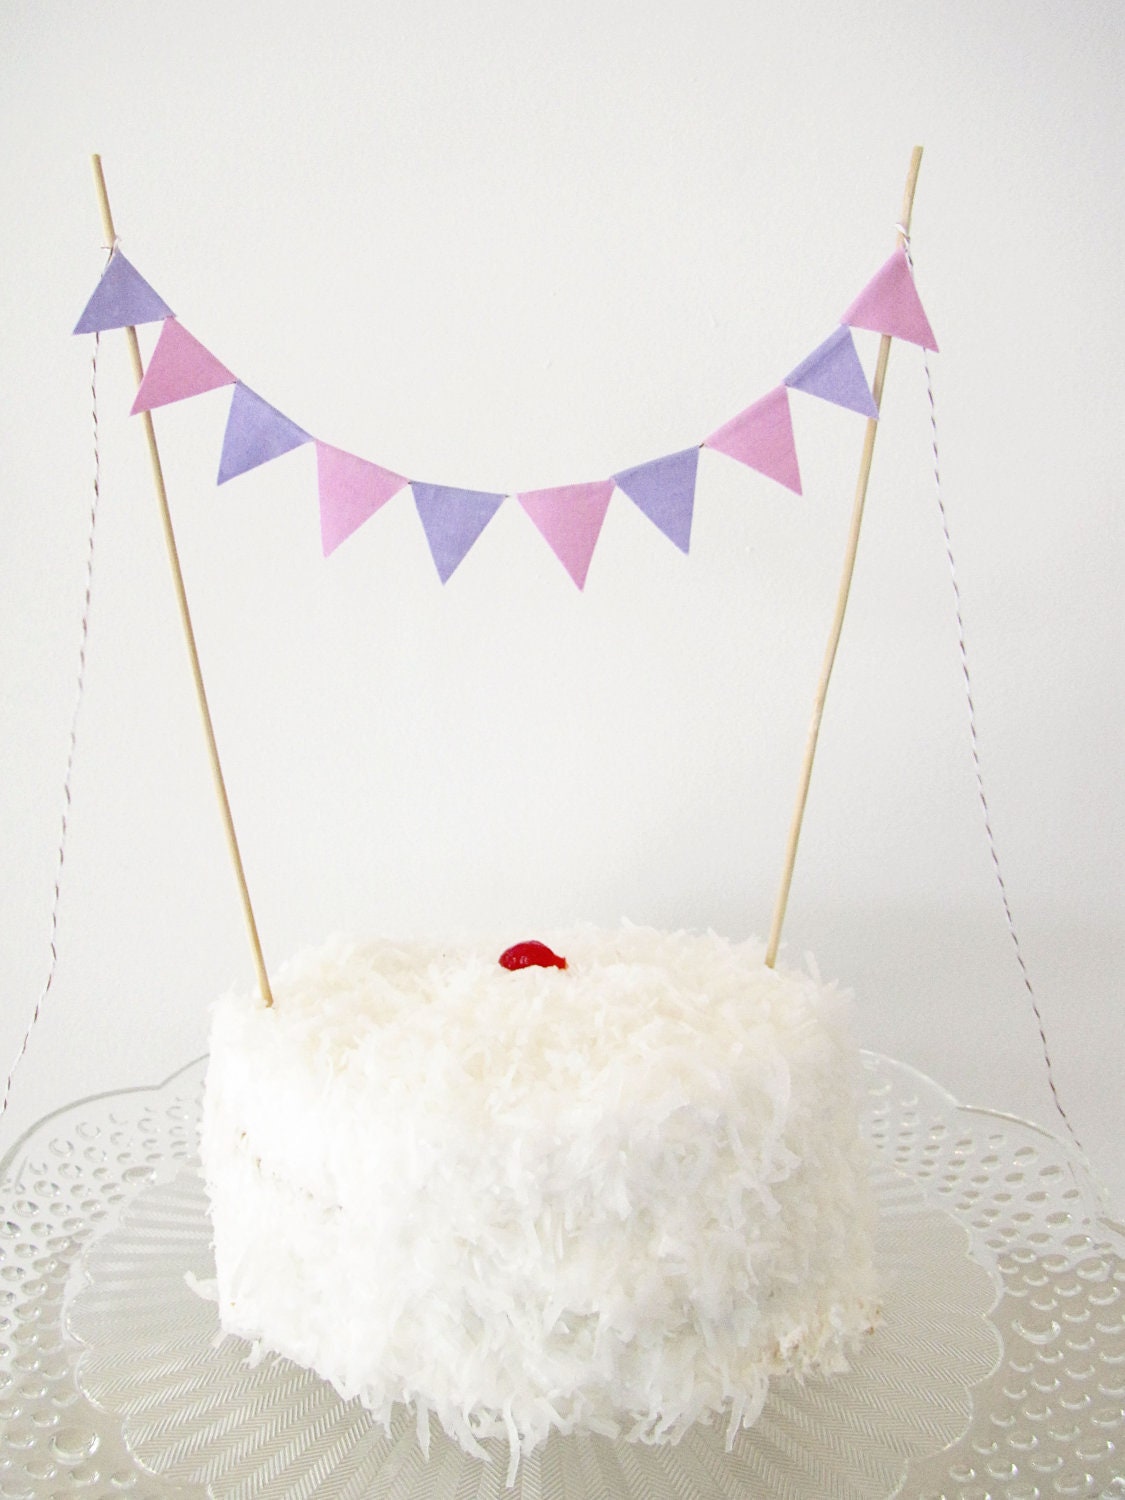 Fabric Cake Bunting Decoration - Cake Topper - Wedding, Birthday Party, Shower Decor in orchid and lilac